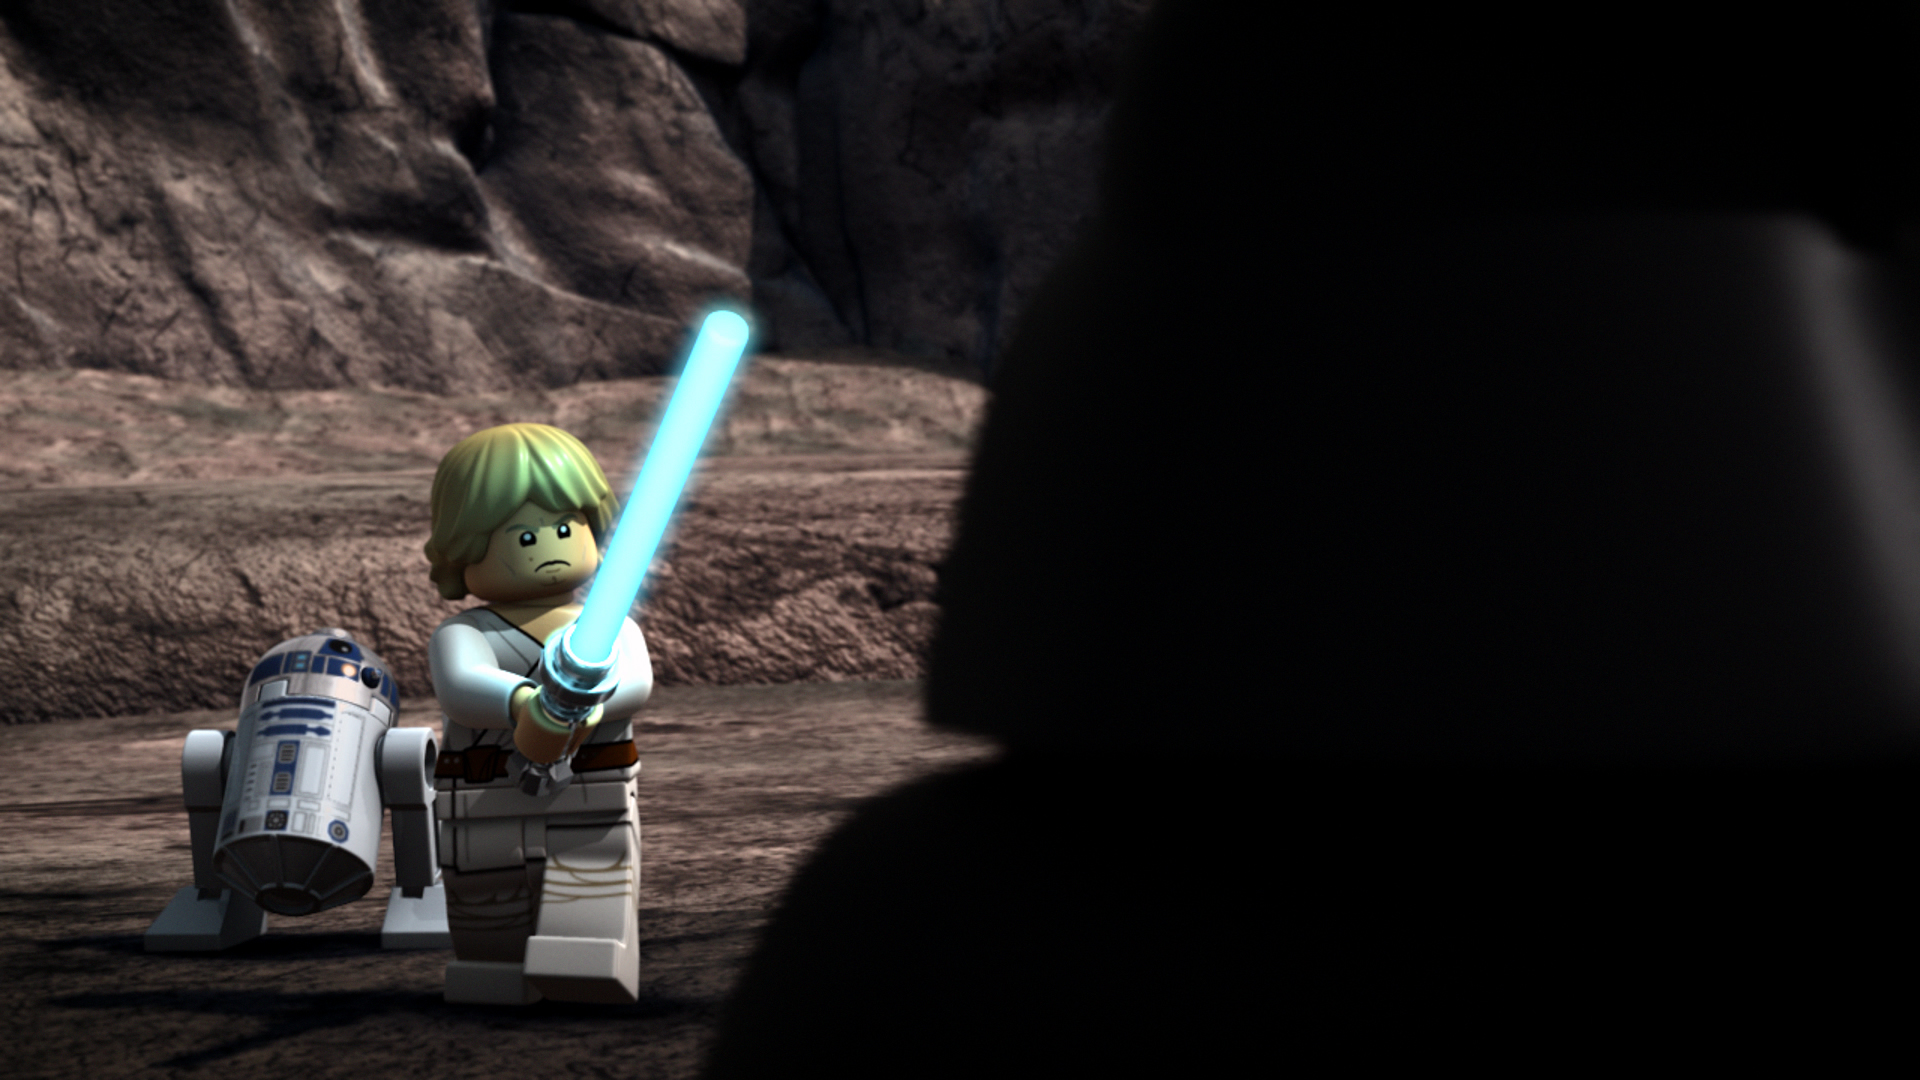 New Yoda Chronicles - Clash of the Skywalkers, The